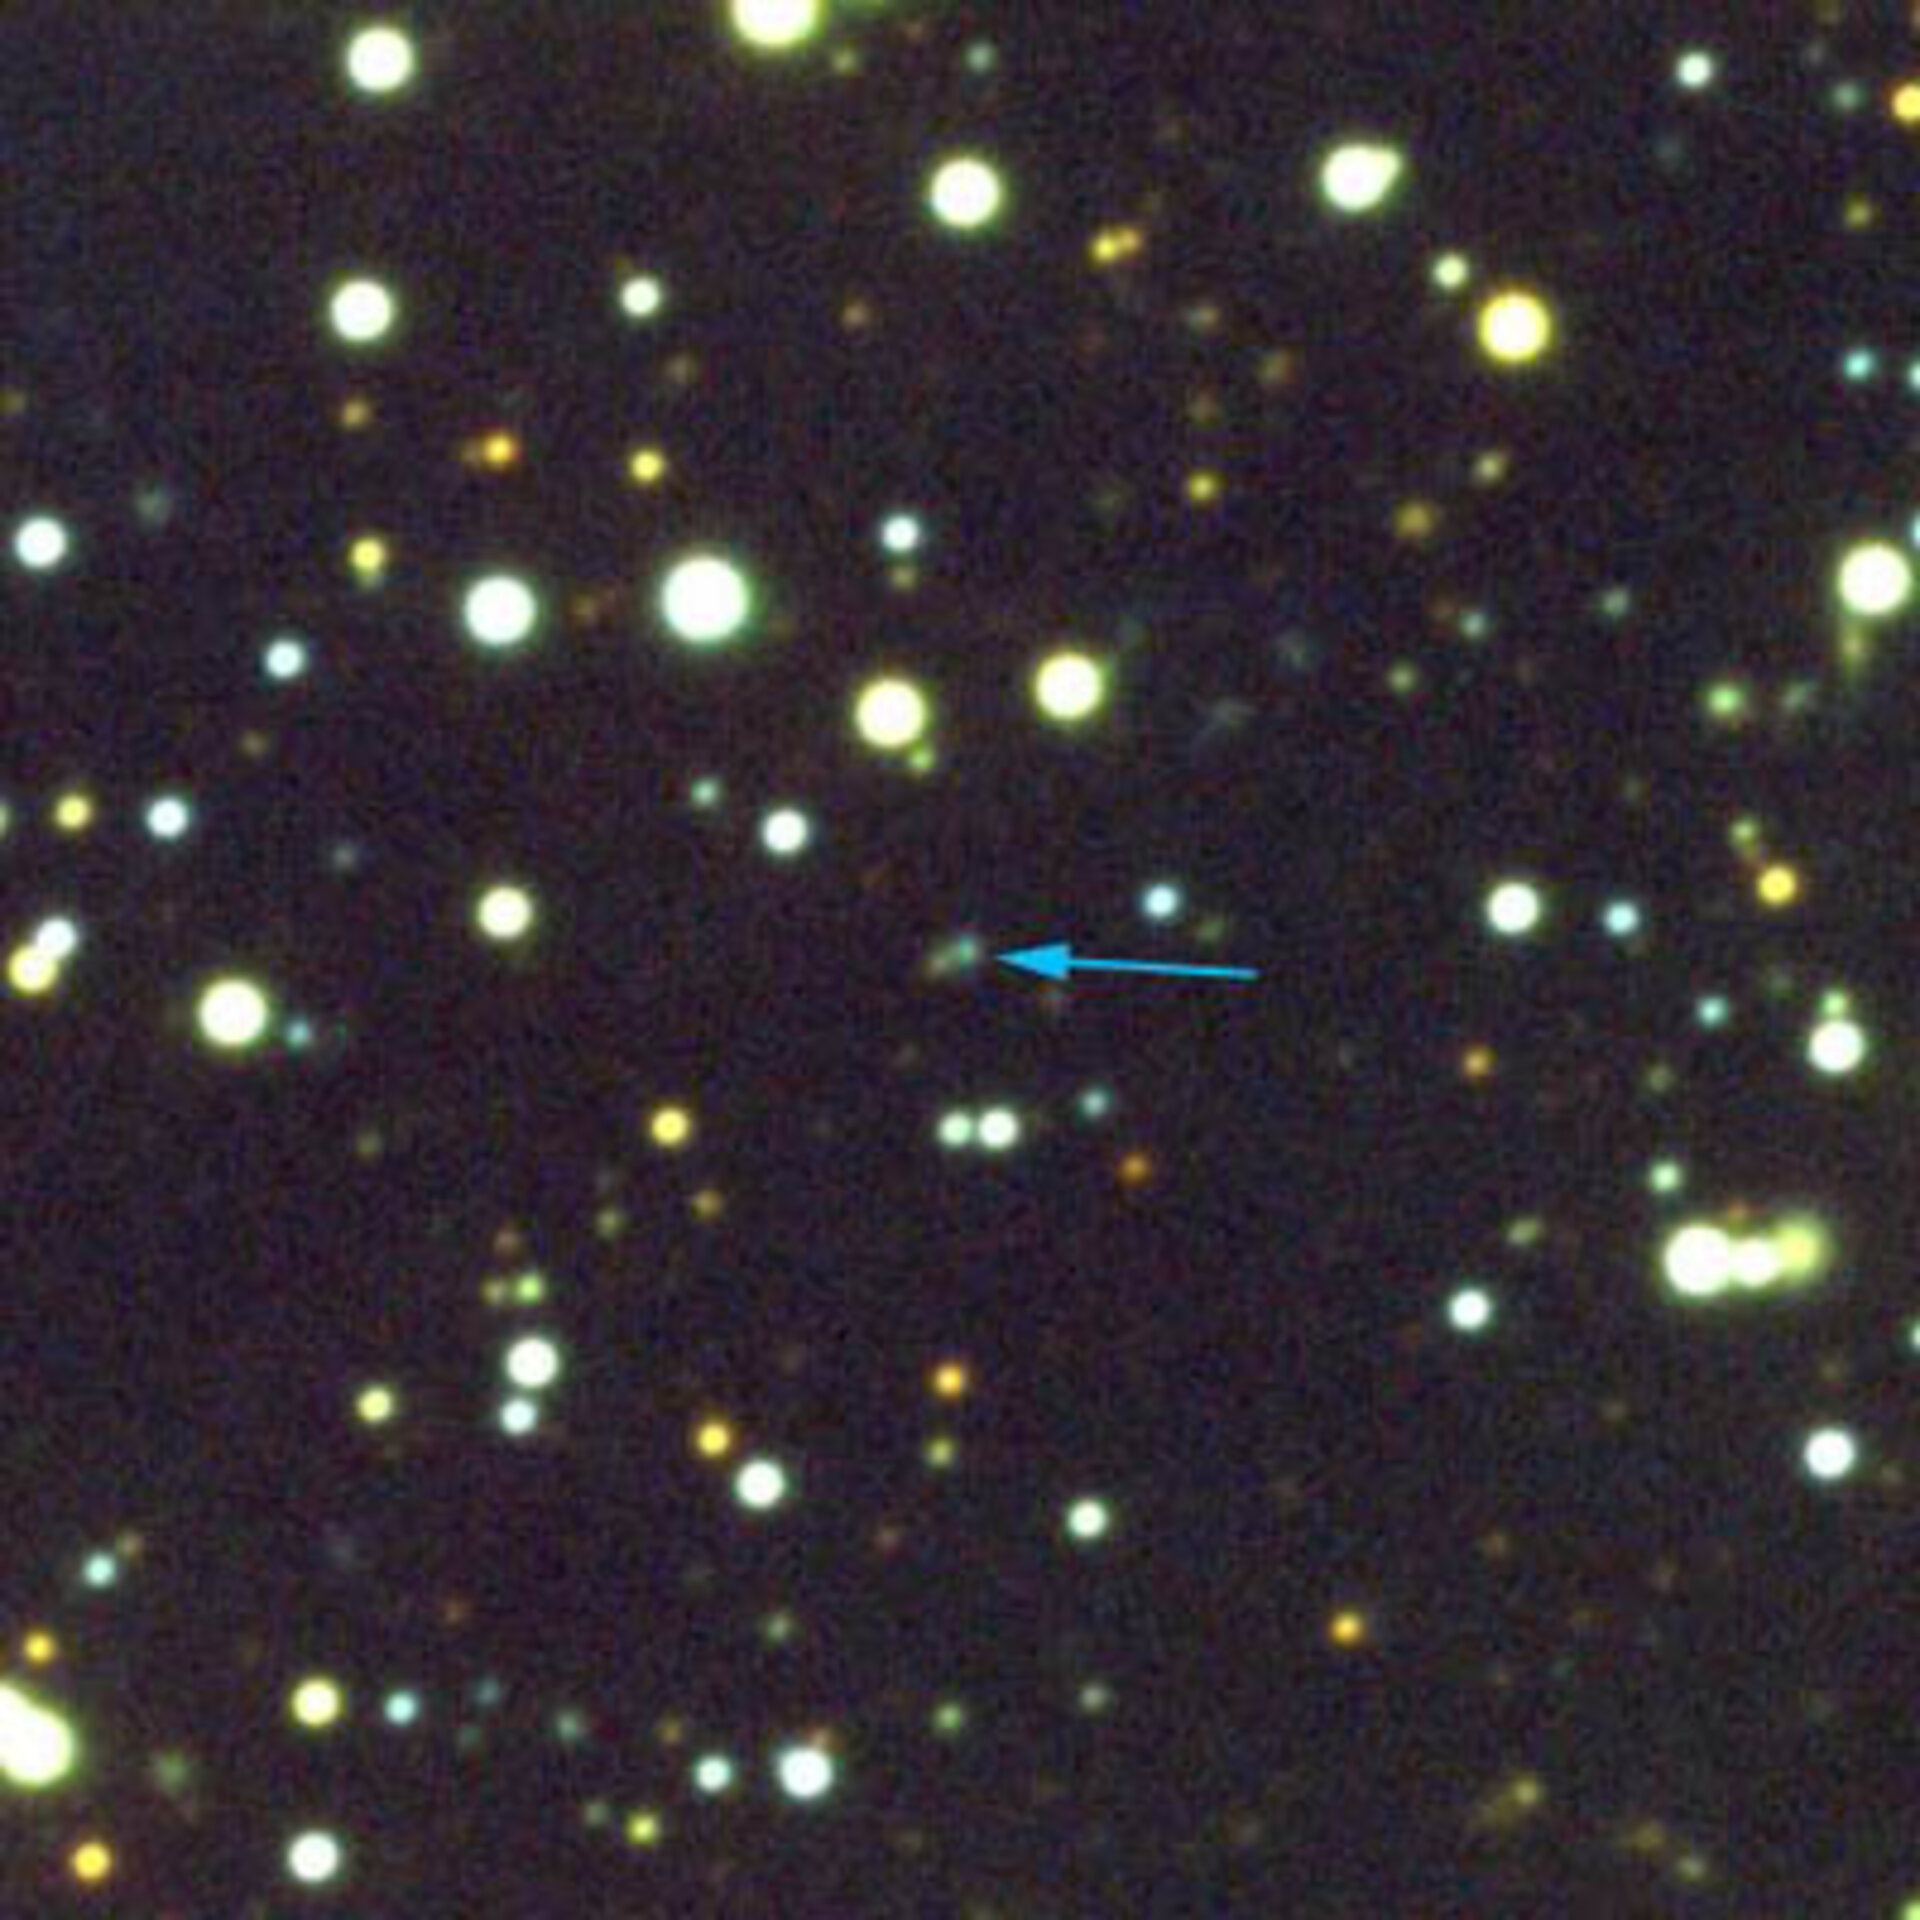 Optical counterpart of the gamma-ray burst detected by Ulysses, Mars Odyssey and BeppoSAX